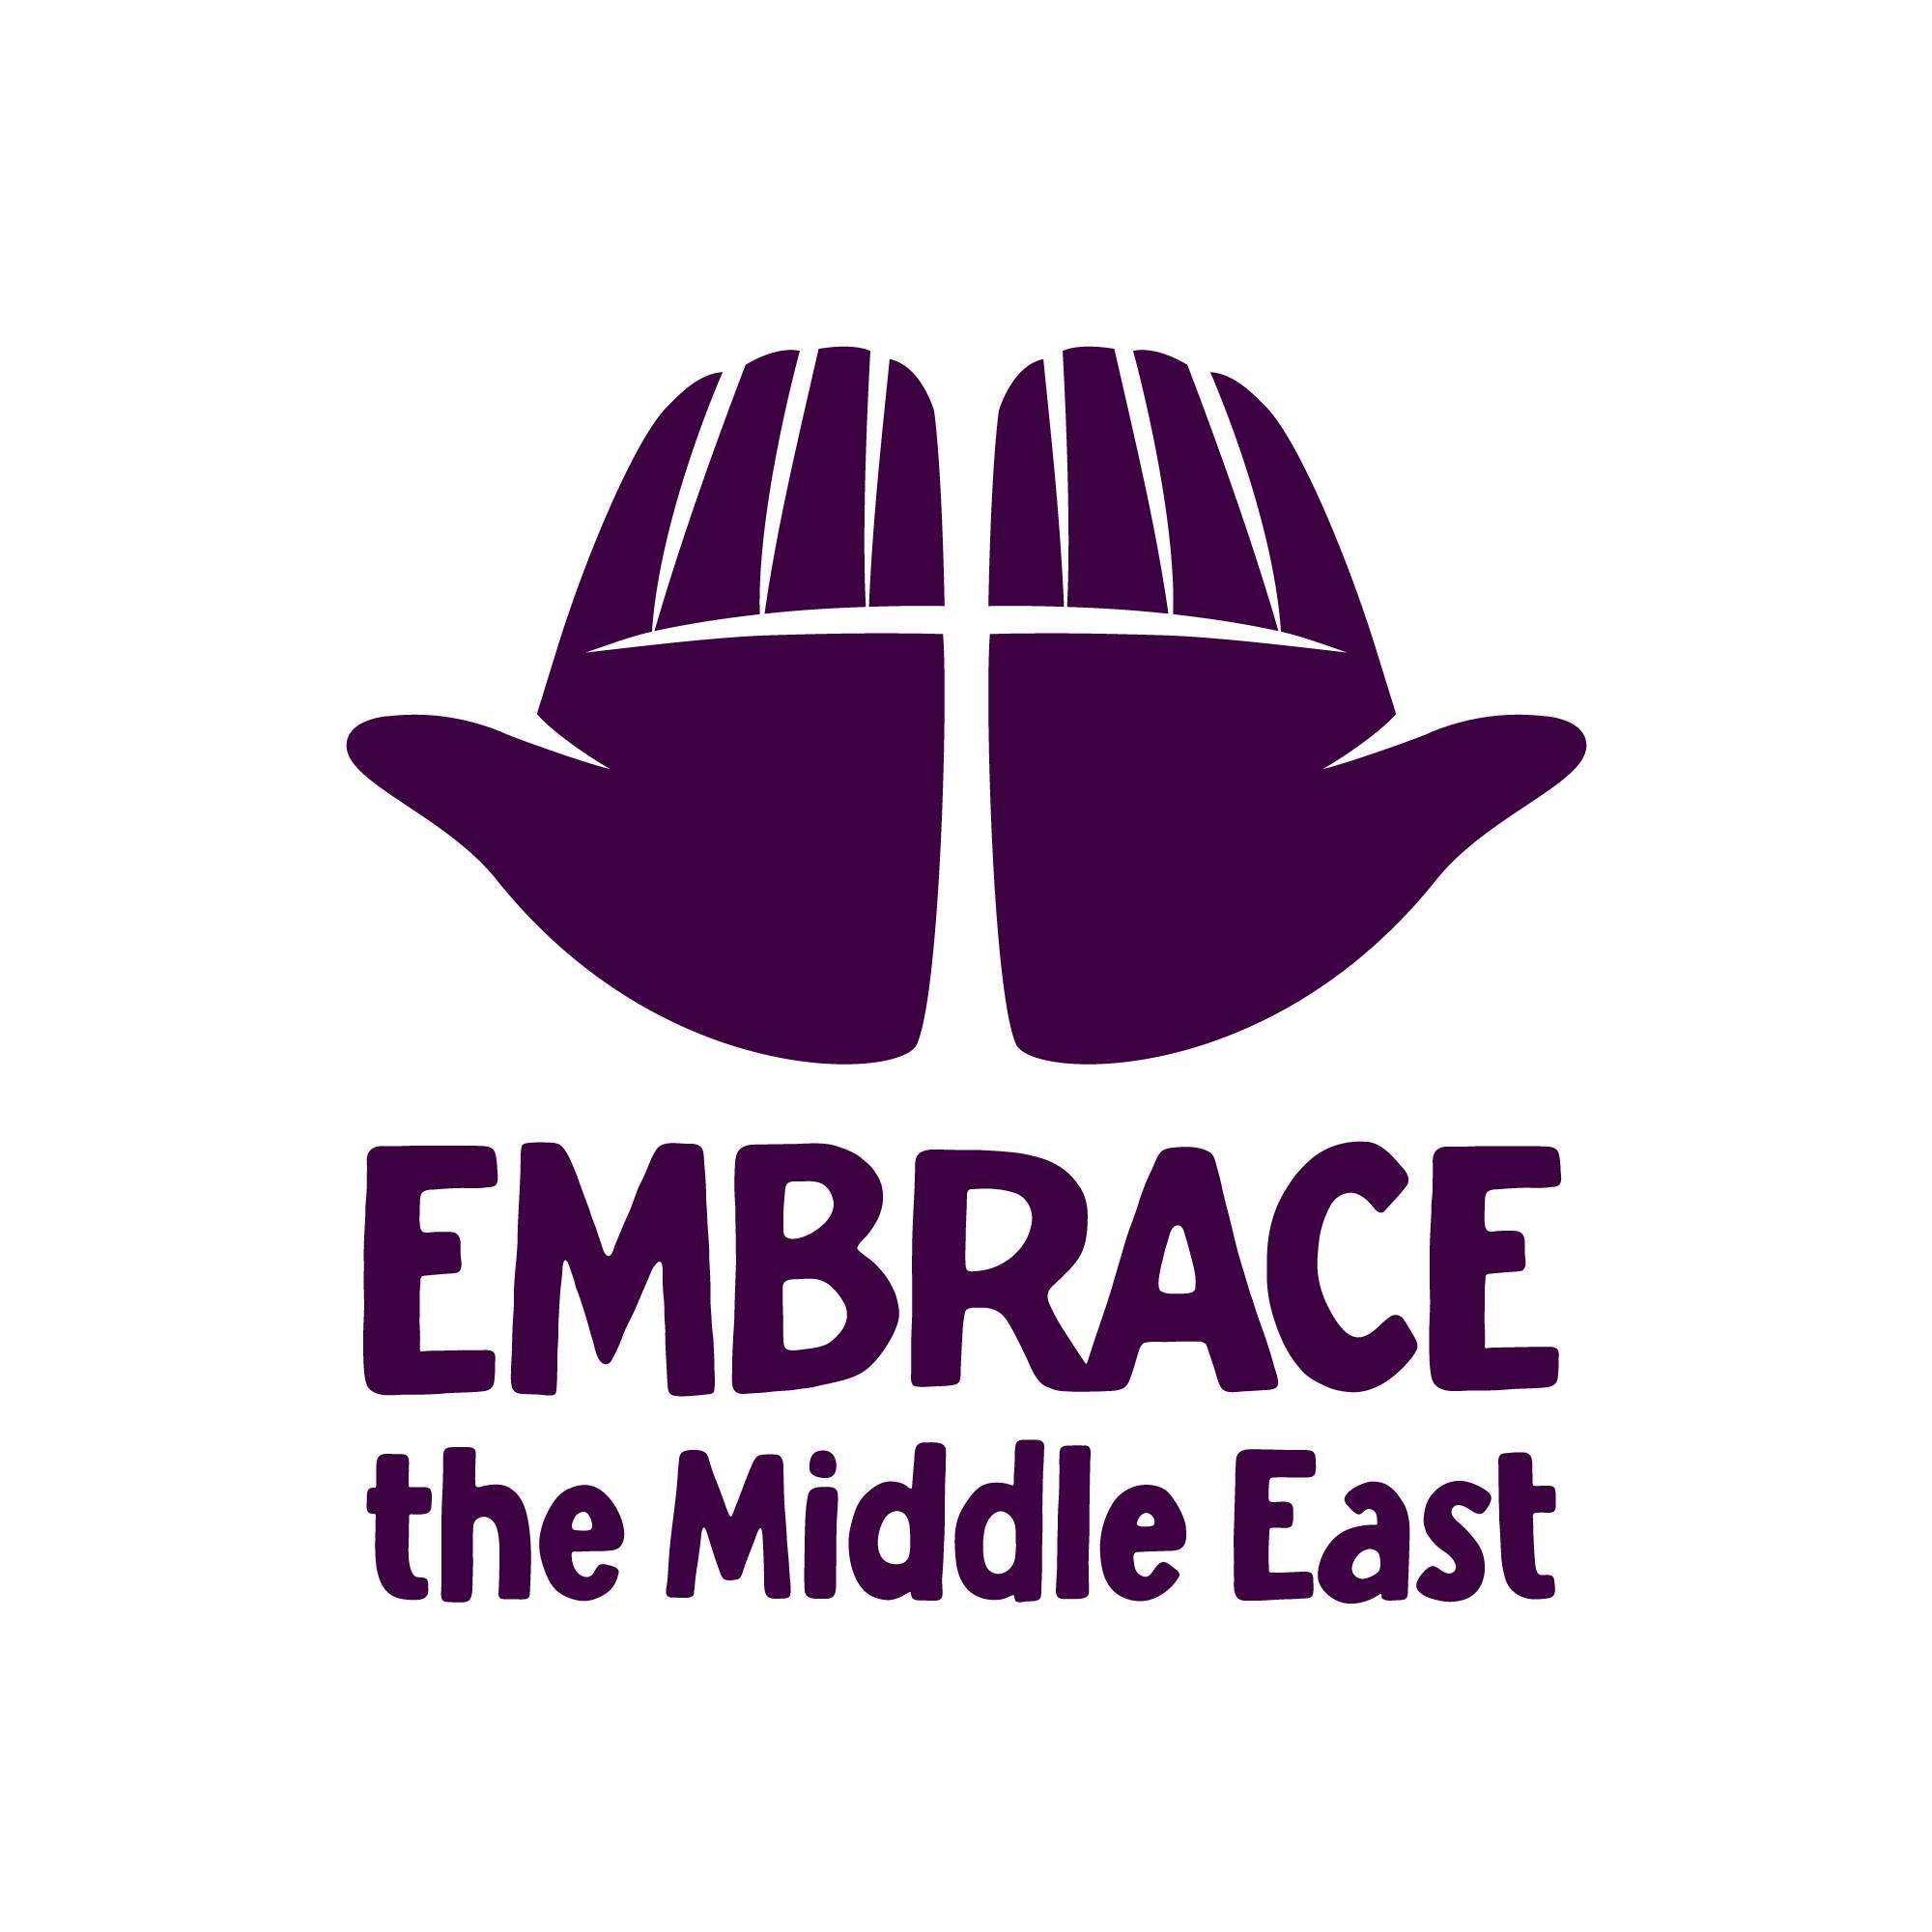 Embrace the middle east logo